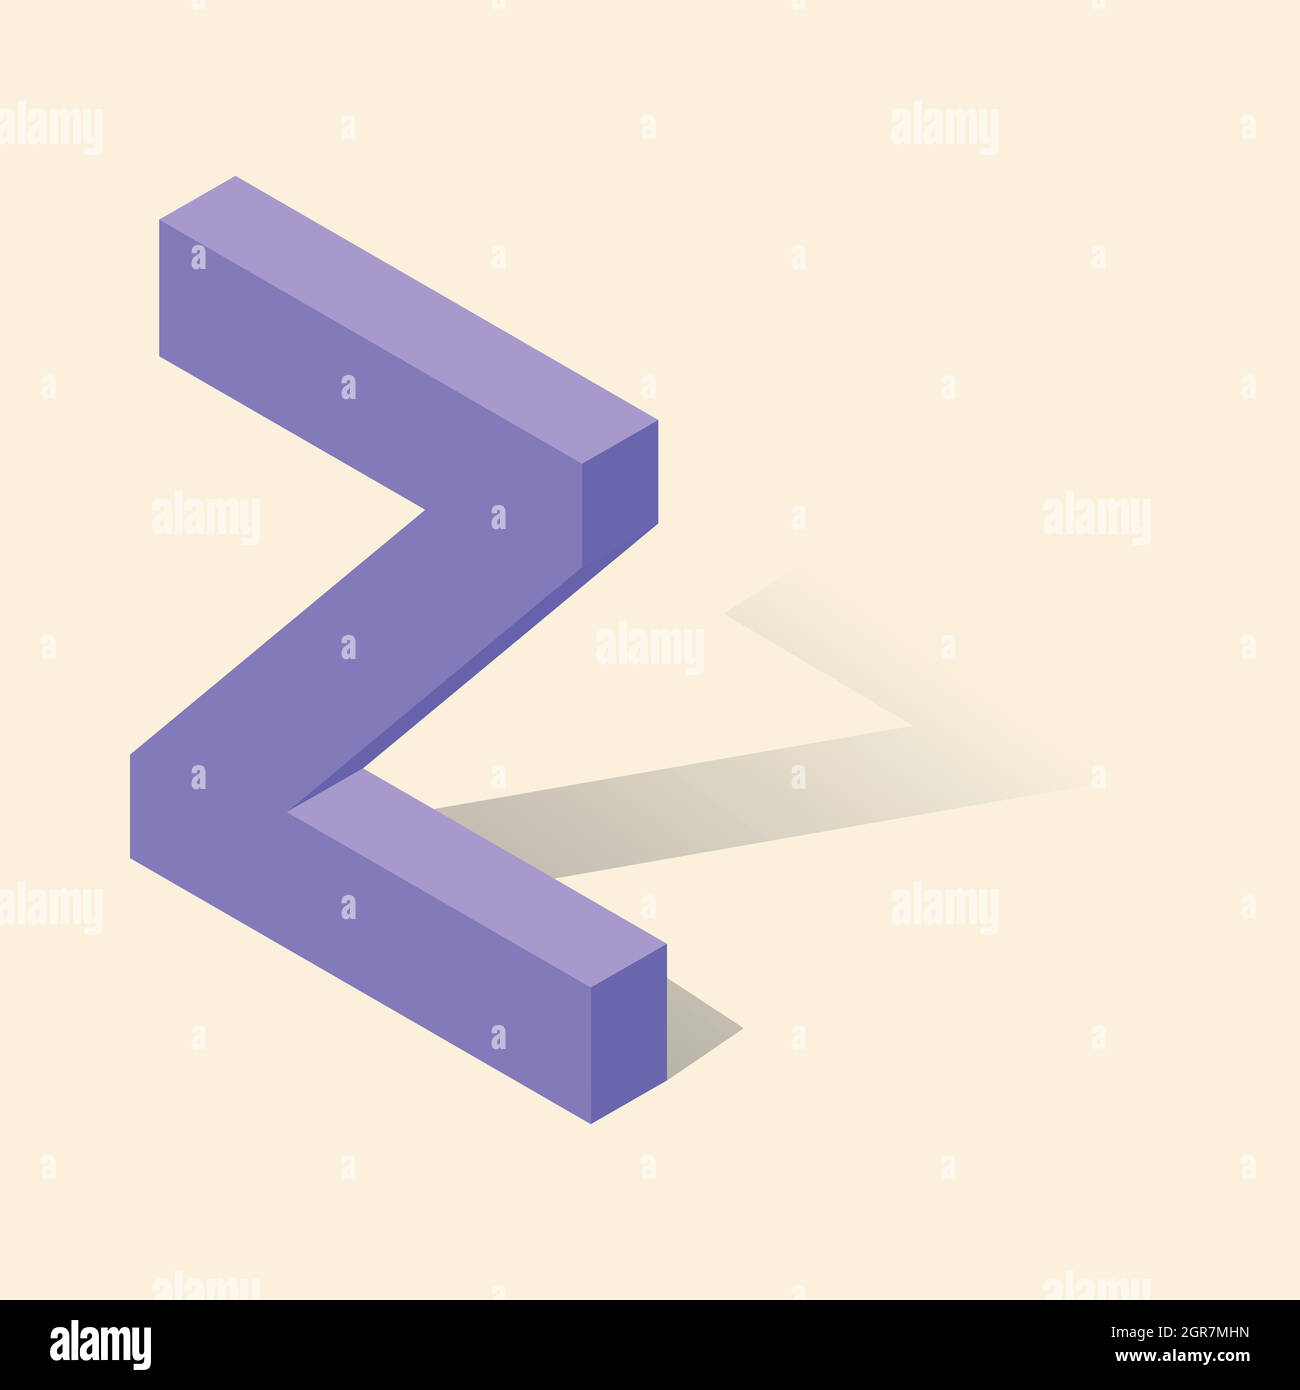 Z letter in isometric 3d style with shadow Stock Vector